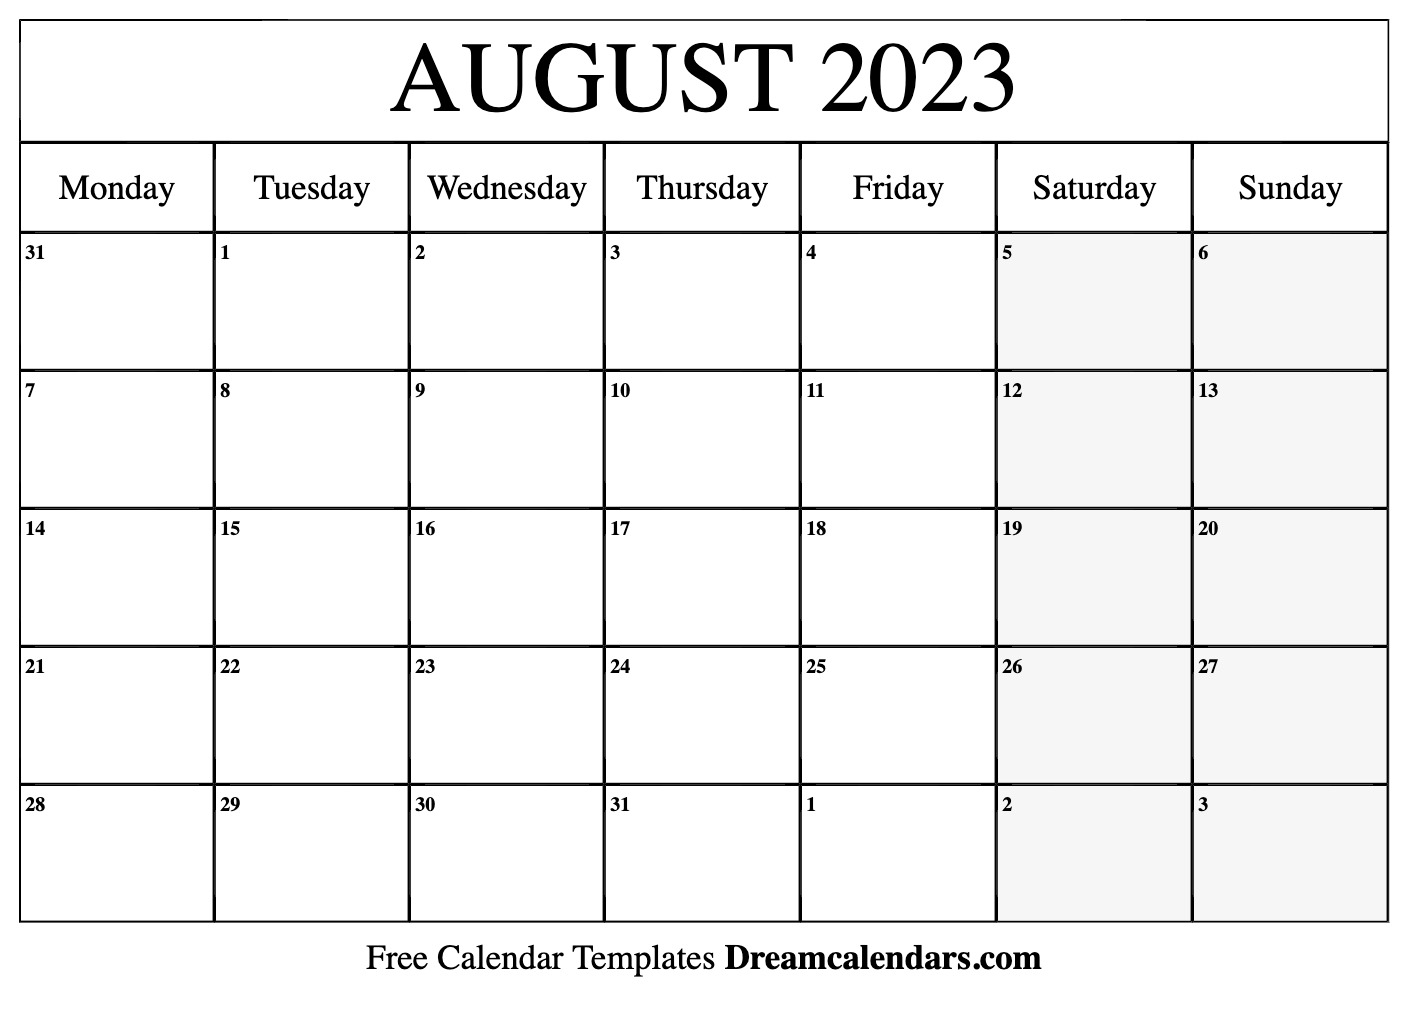 August 2023 Calendar Free Printable with Holidays and Observances